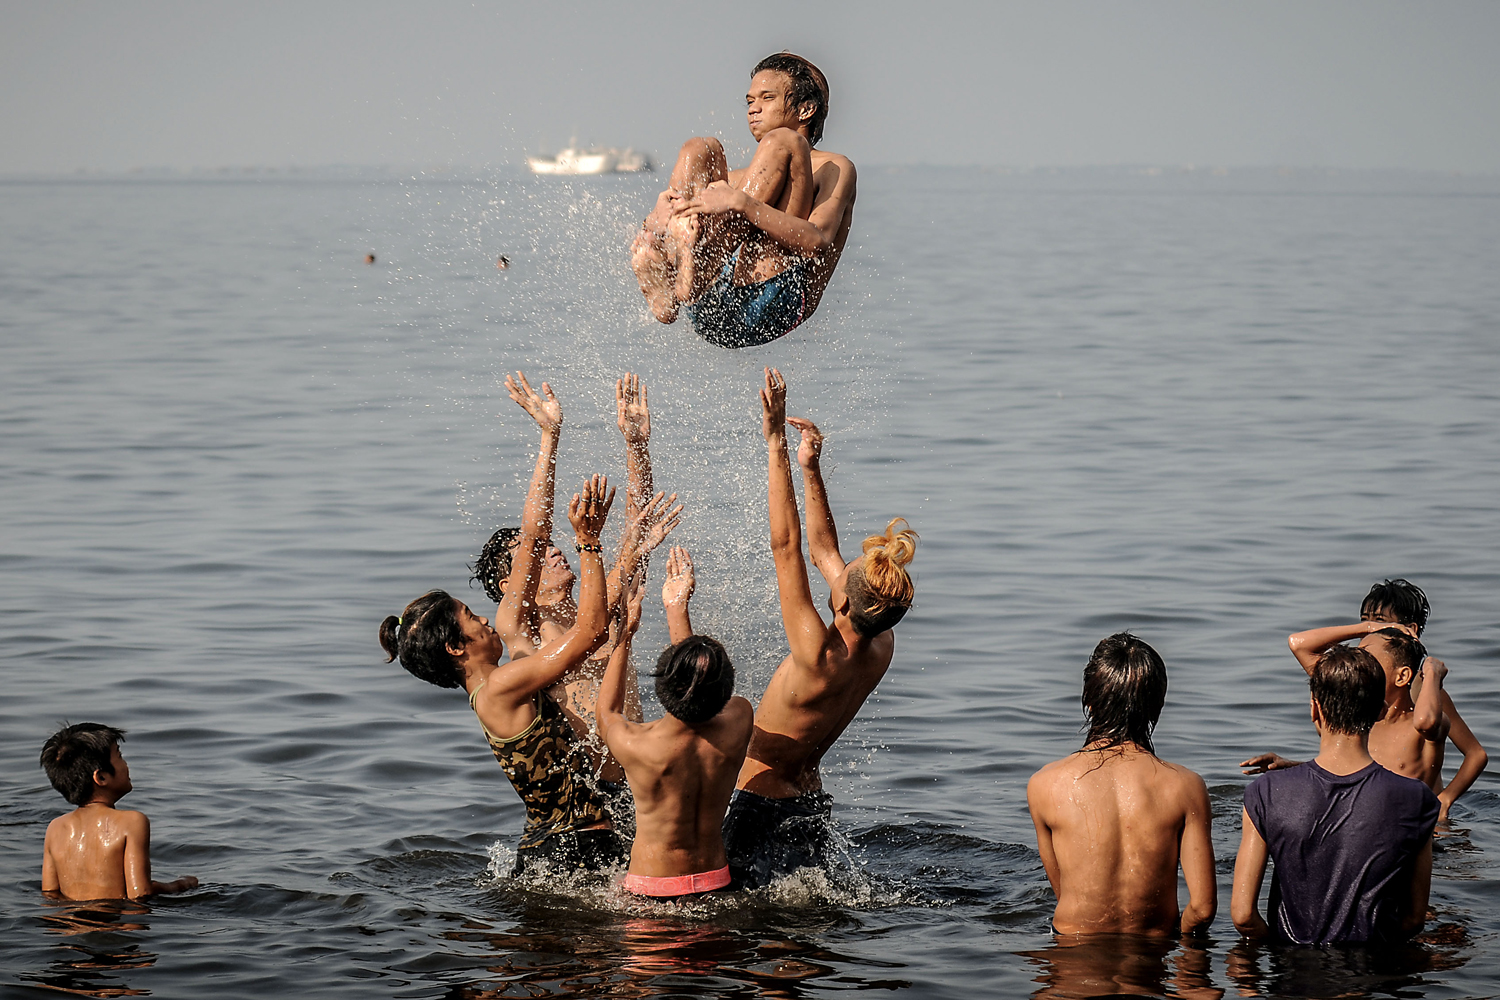 Filipinos cool off in the polluted waters of Manila Bay during Easter Sunday in Manila, Philippines, April 20, 2014.